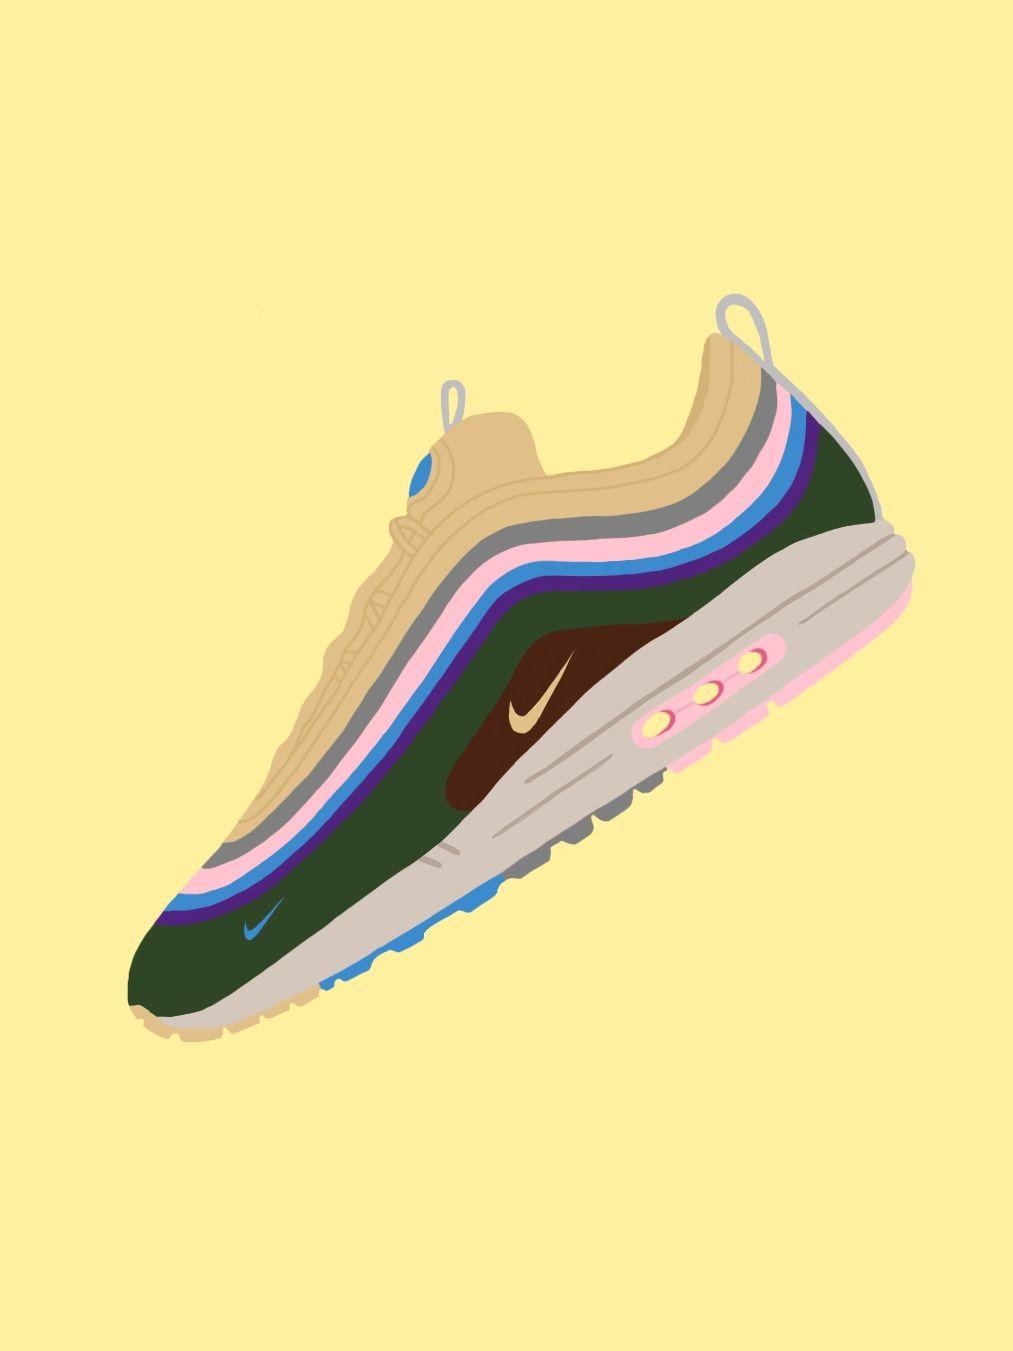 Sean Wotherspoon Wallpapers - Wallpaper